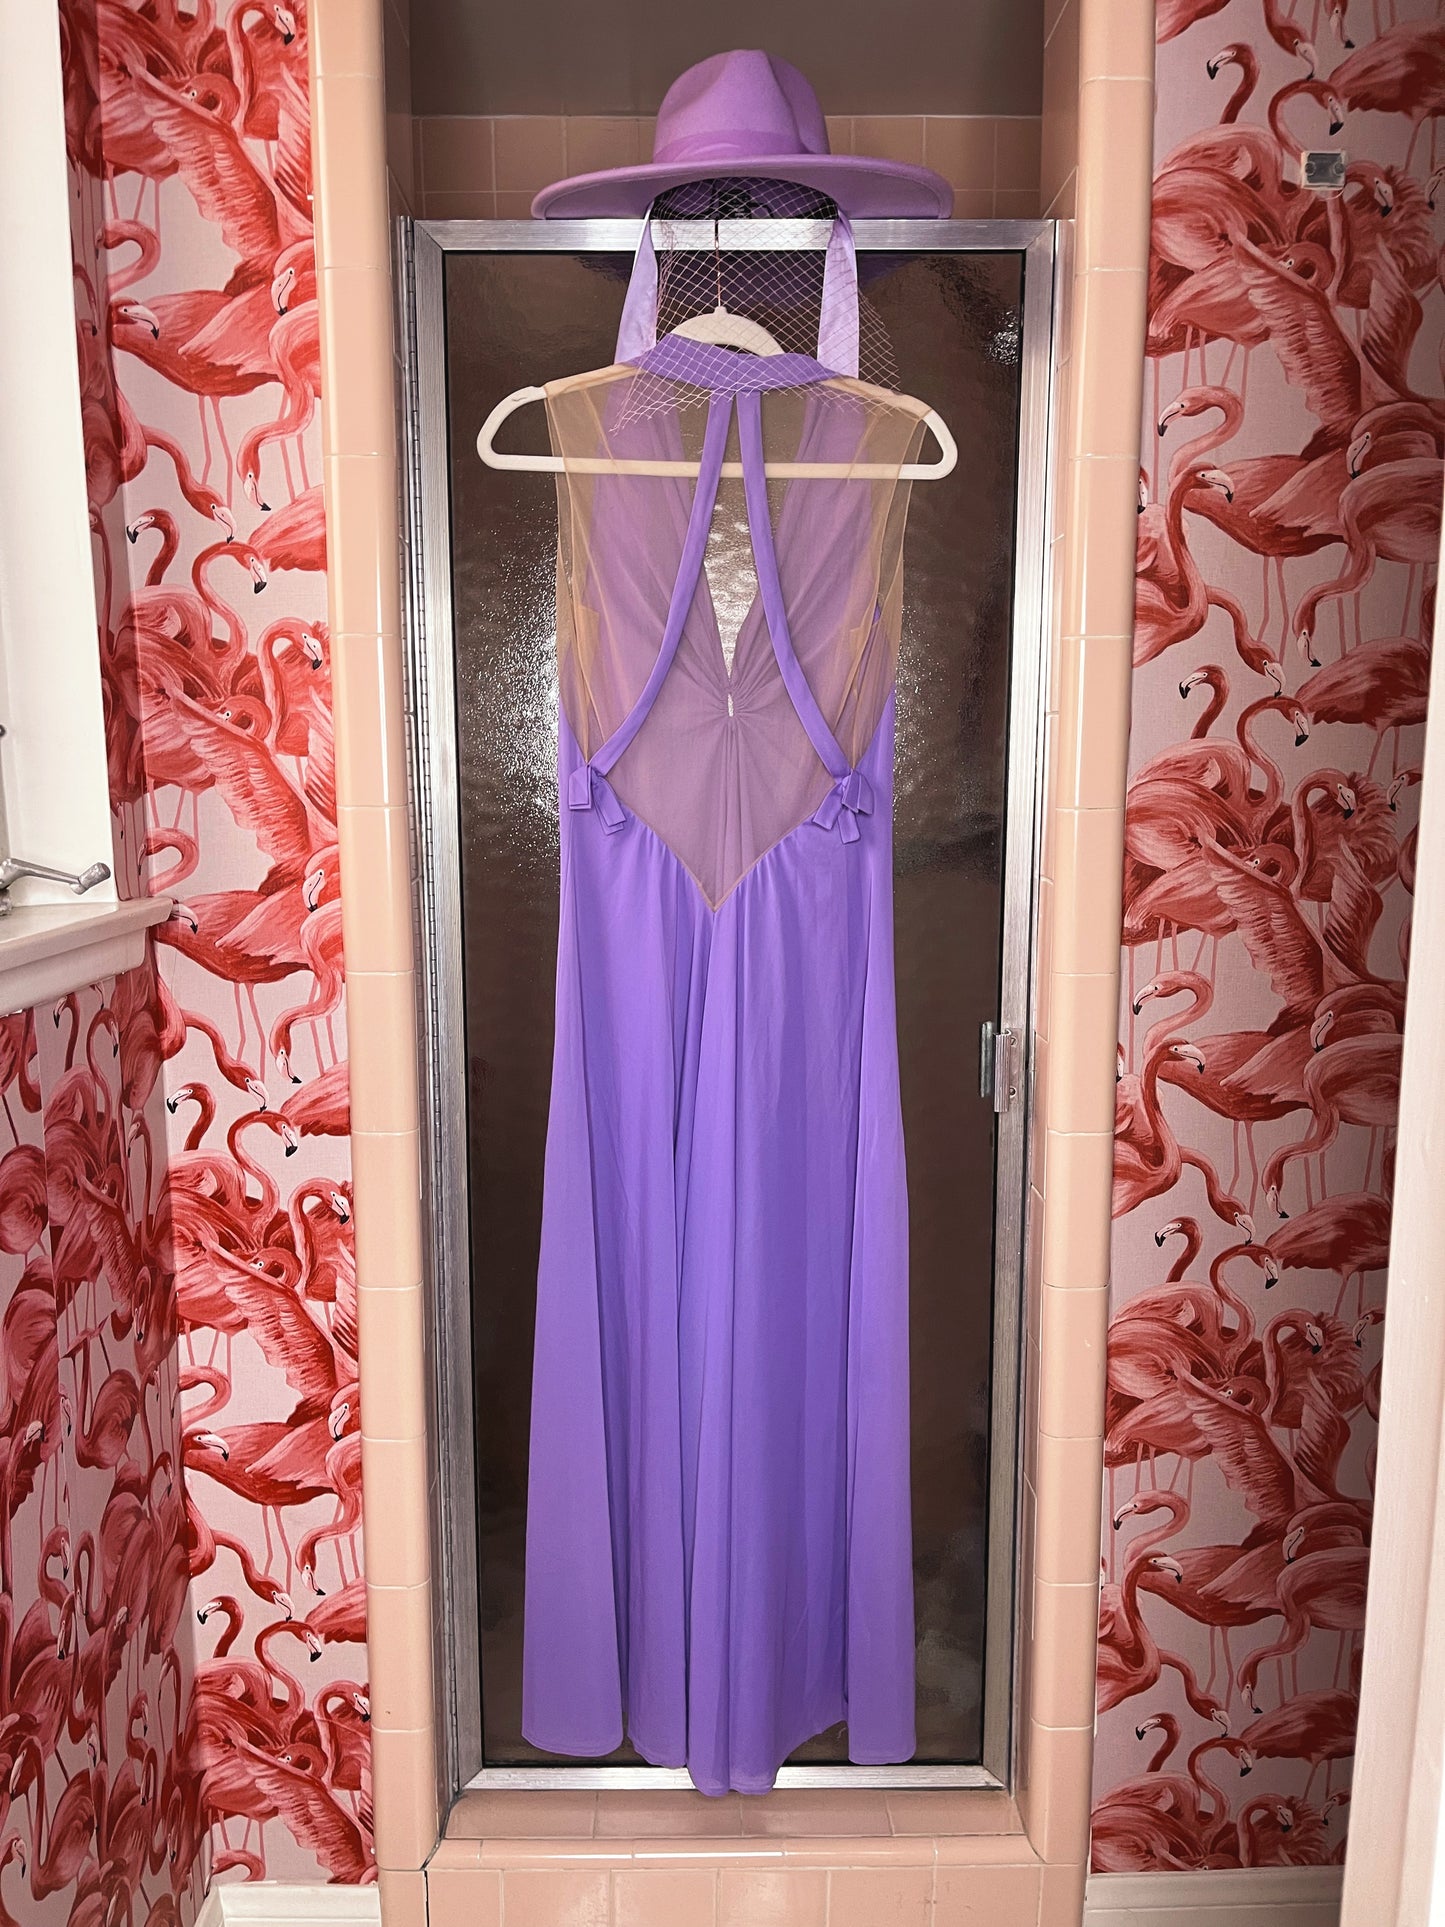 Vintage 60s Claire Sandra by Lucie Ann Beverly Hills Lavender Slip Dress Fits Sizes XS-SM & Possible Size M